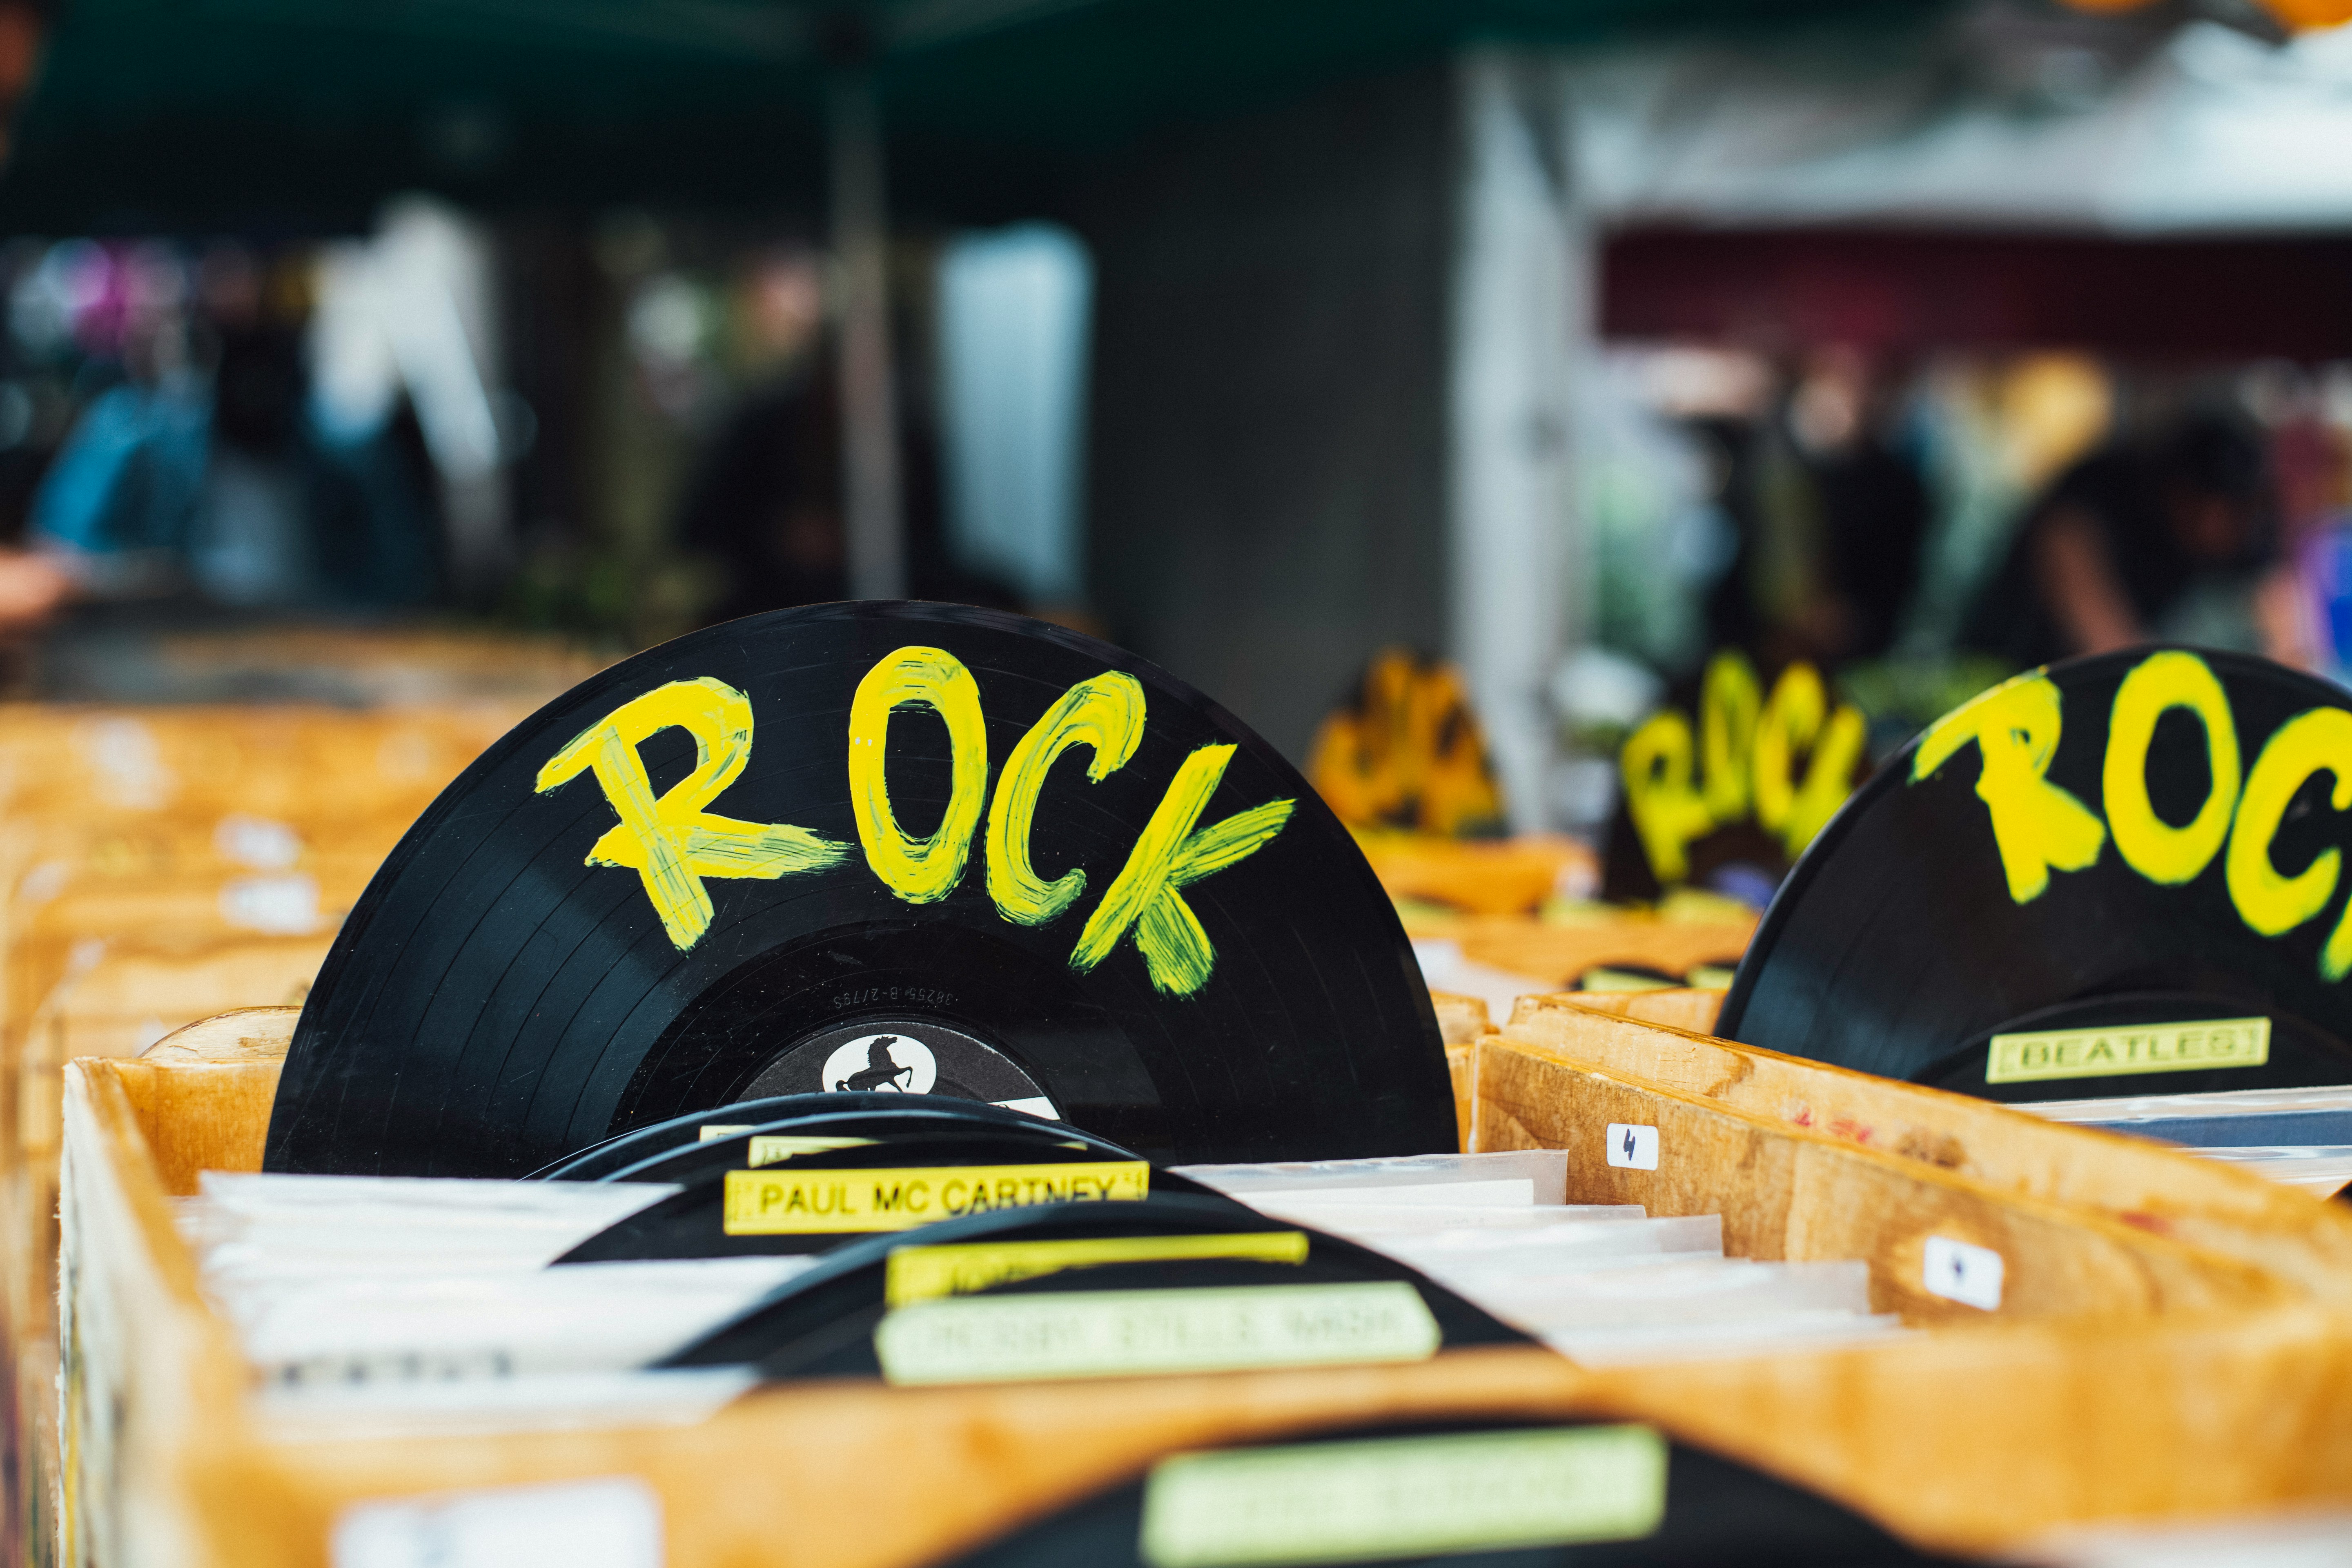 Photo of a box of records, one of which as the word "Rock" written on it. Photo courtesy of Markus Spiske via Unsplash.